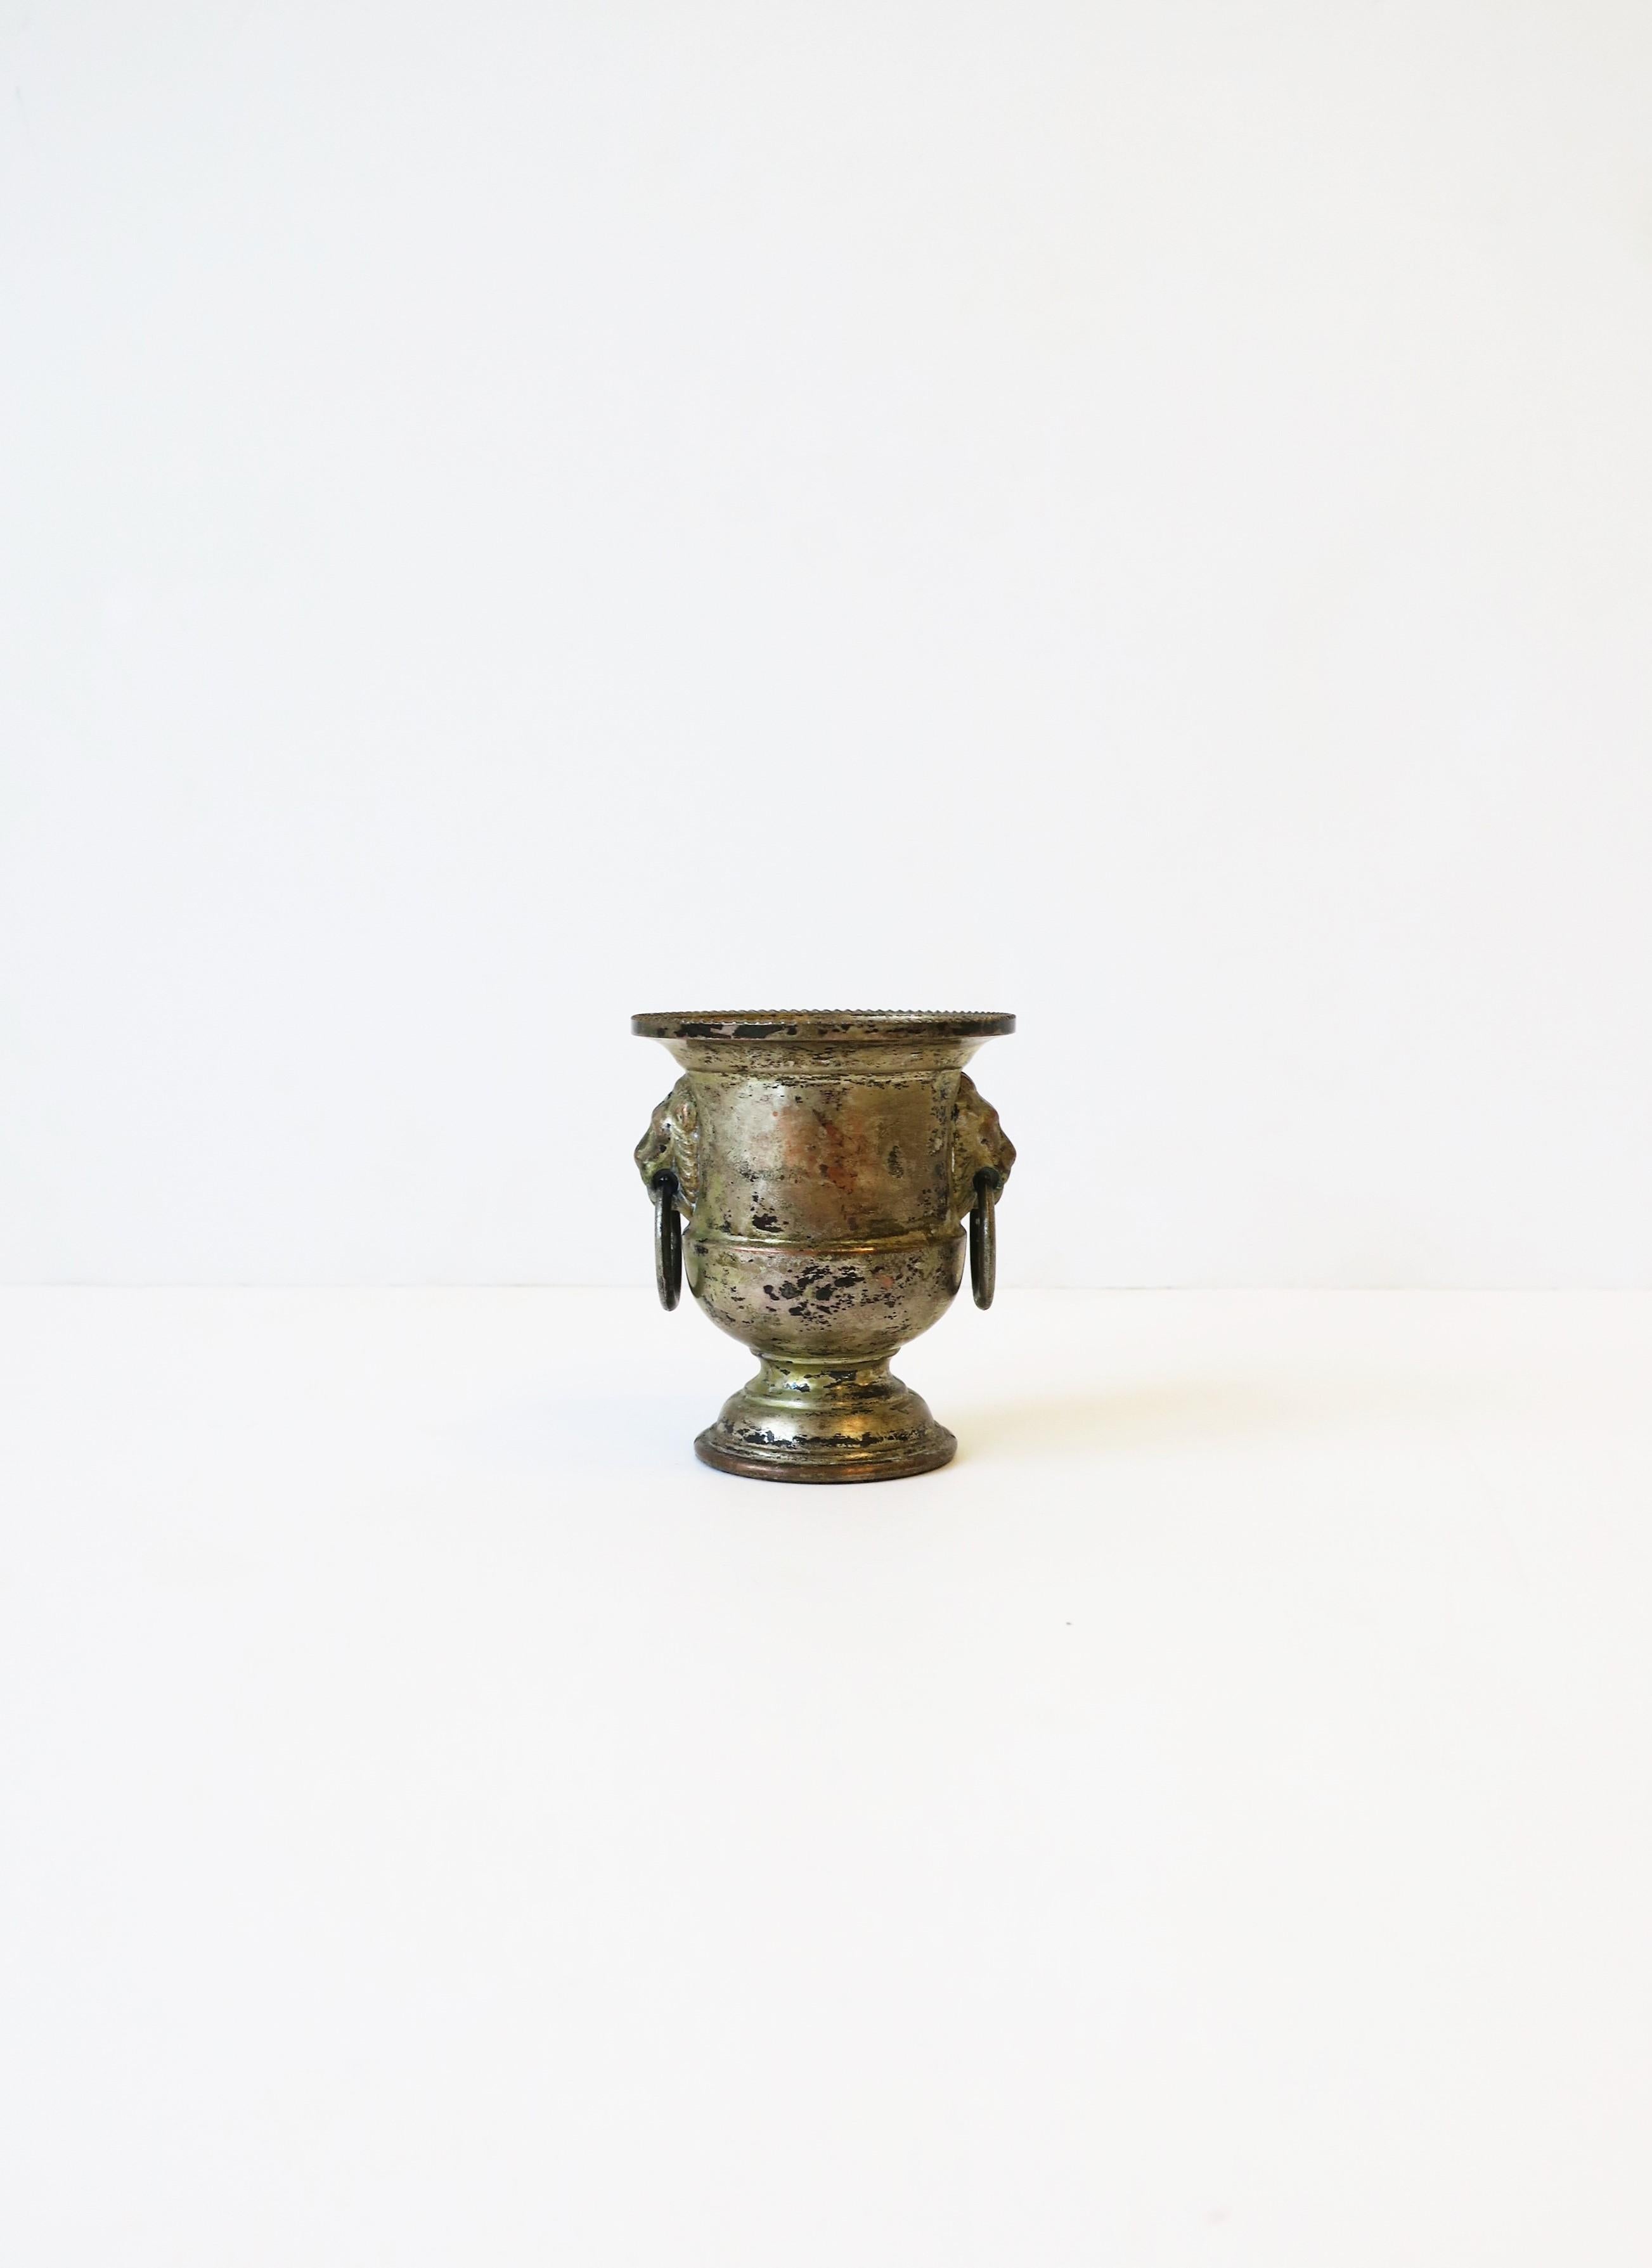 A small Italian sterling silver plate Regency style urn with Lion head and loop detail, circa 20th-century, Italy. A great piece for any bar, bar cart, entertaining, etc. to hold appetizer picks or other items, etc. Marked on bottom as shown in